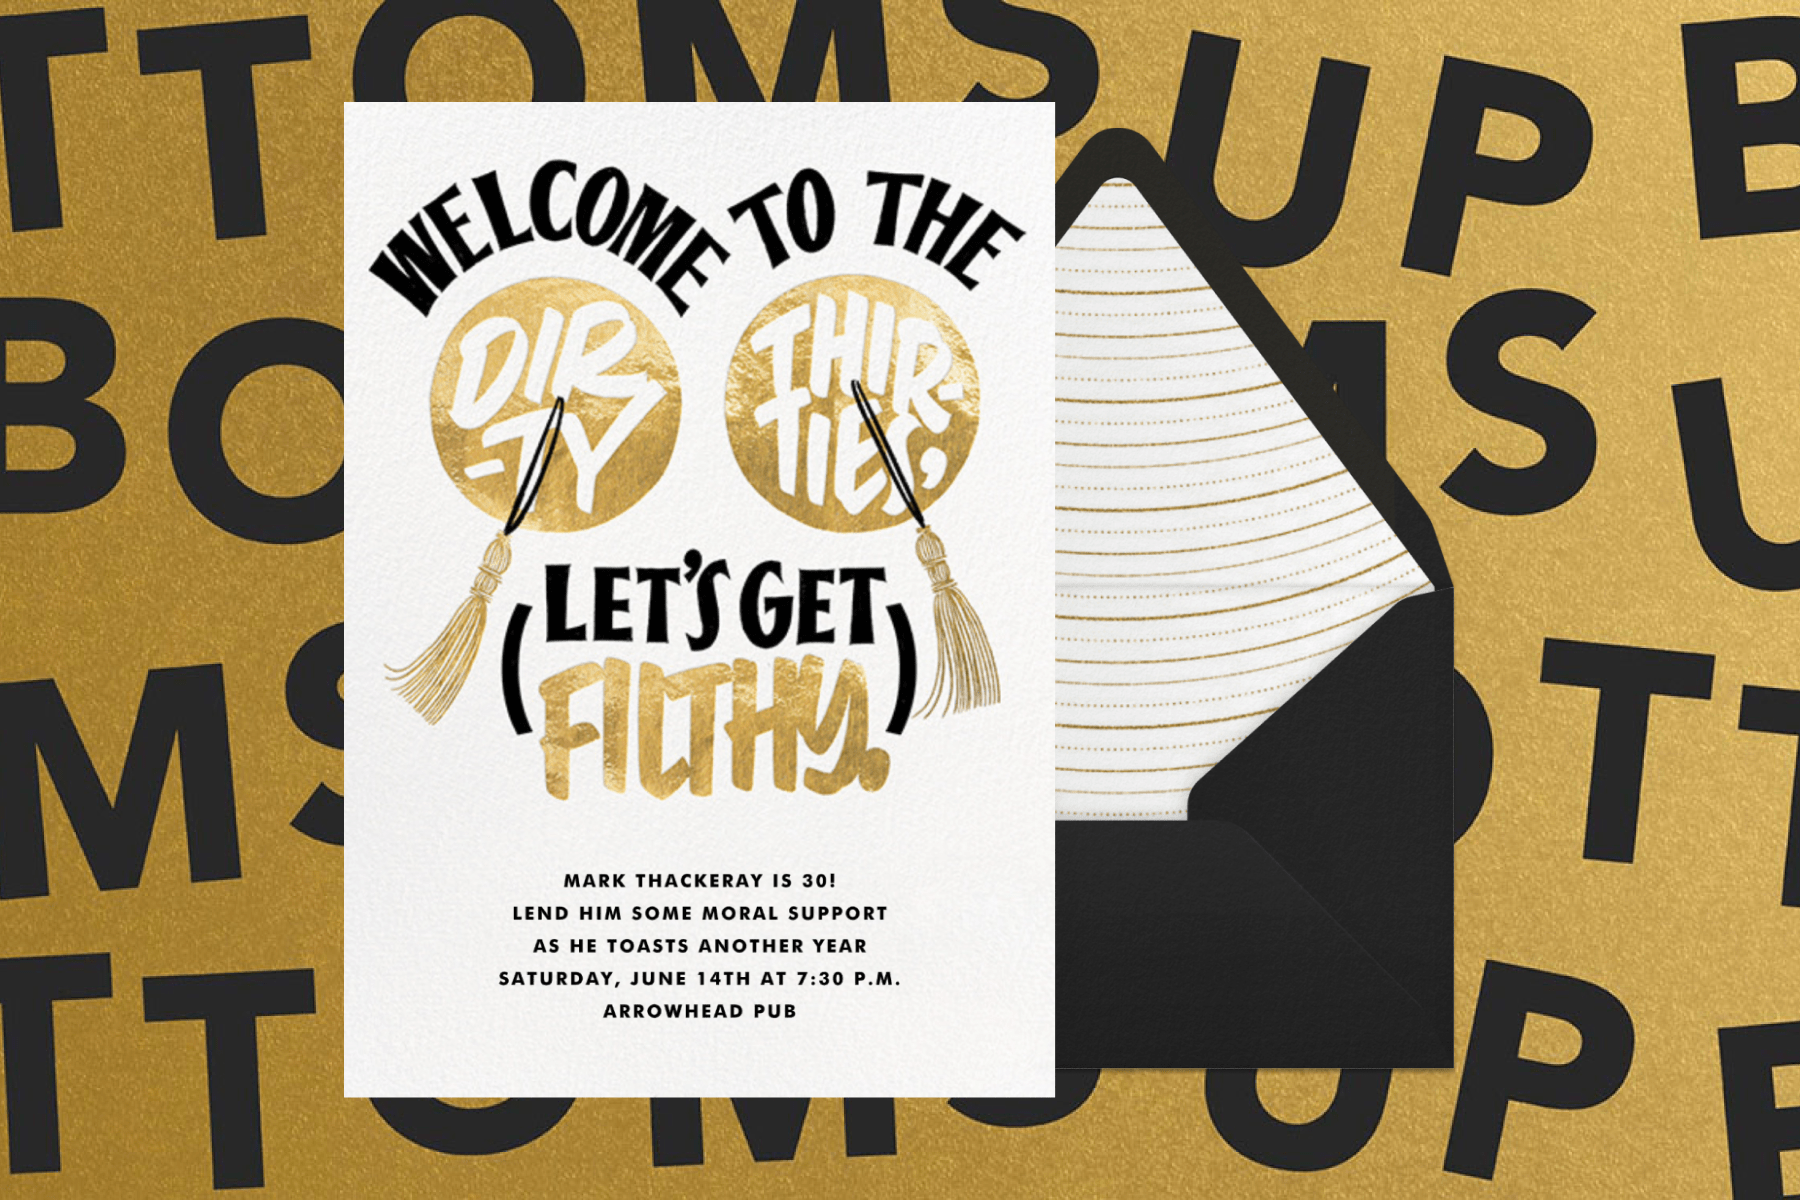 A black, white, and gold invitation reading ‘WELCOME TO THE DIRTY THIRTIES, LET’S GET FILTHY’ over a gold background with black lettering reading ‘BOTTOMS UP’.